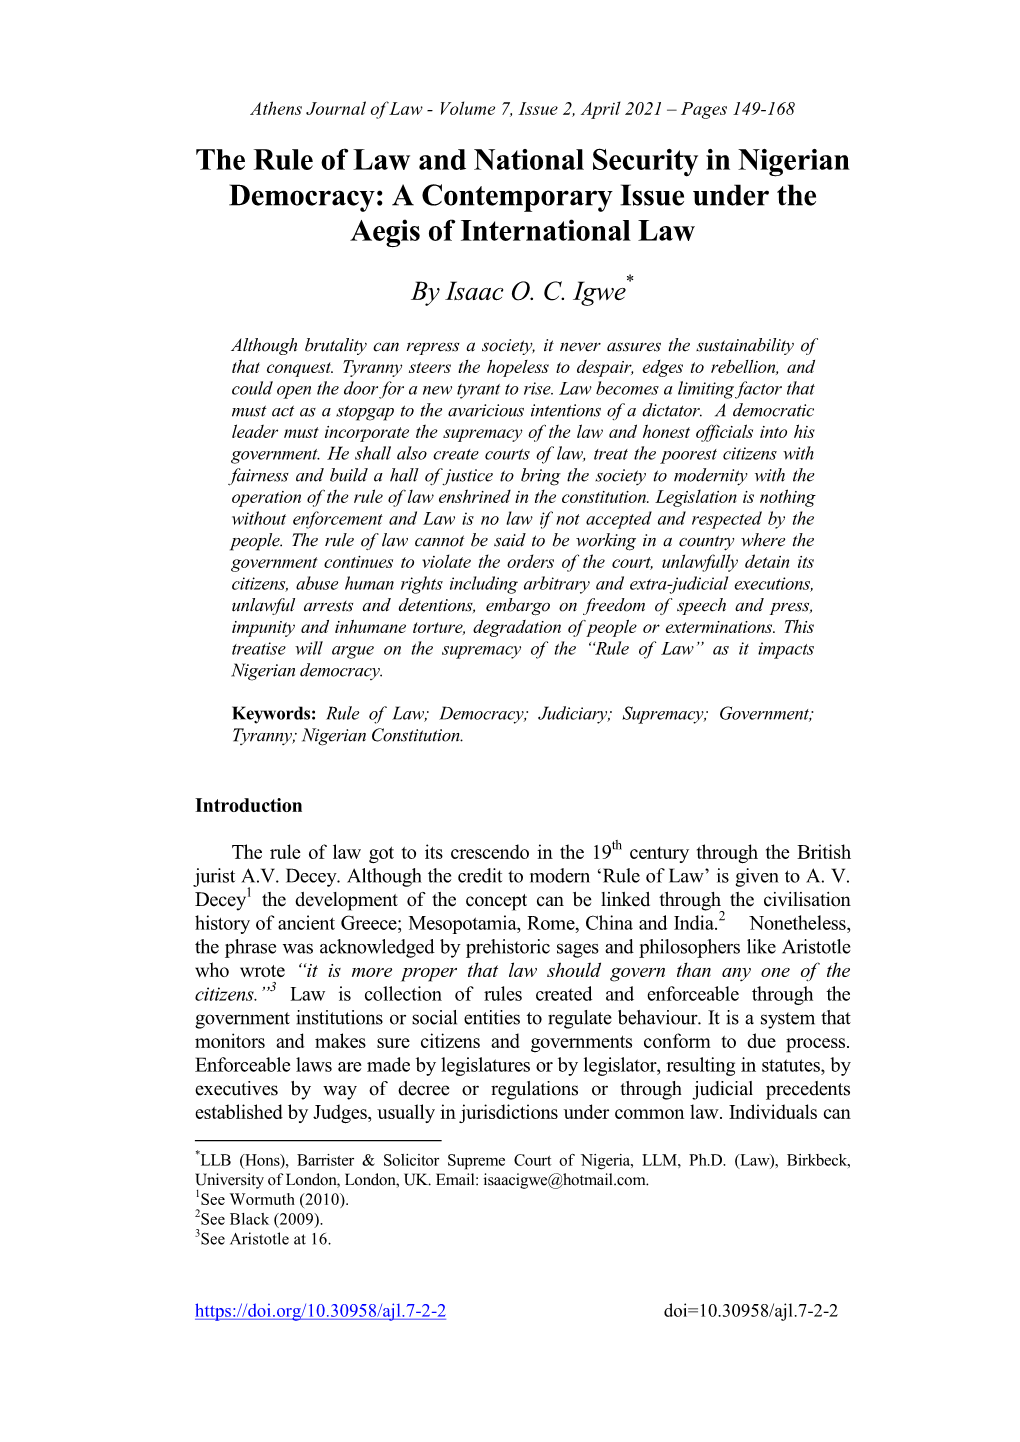 The Rule of Law and National Security in Nigerian Democracy: a Contemporary Issue Under the Aegis of International Law